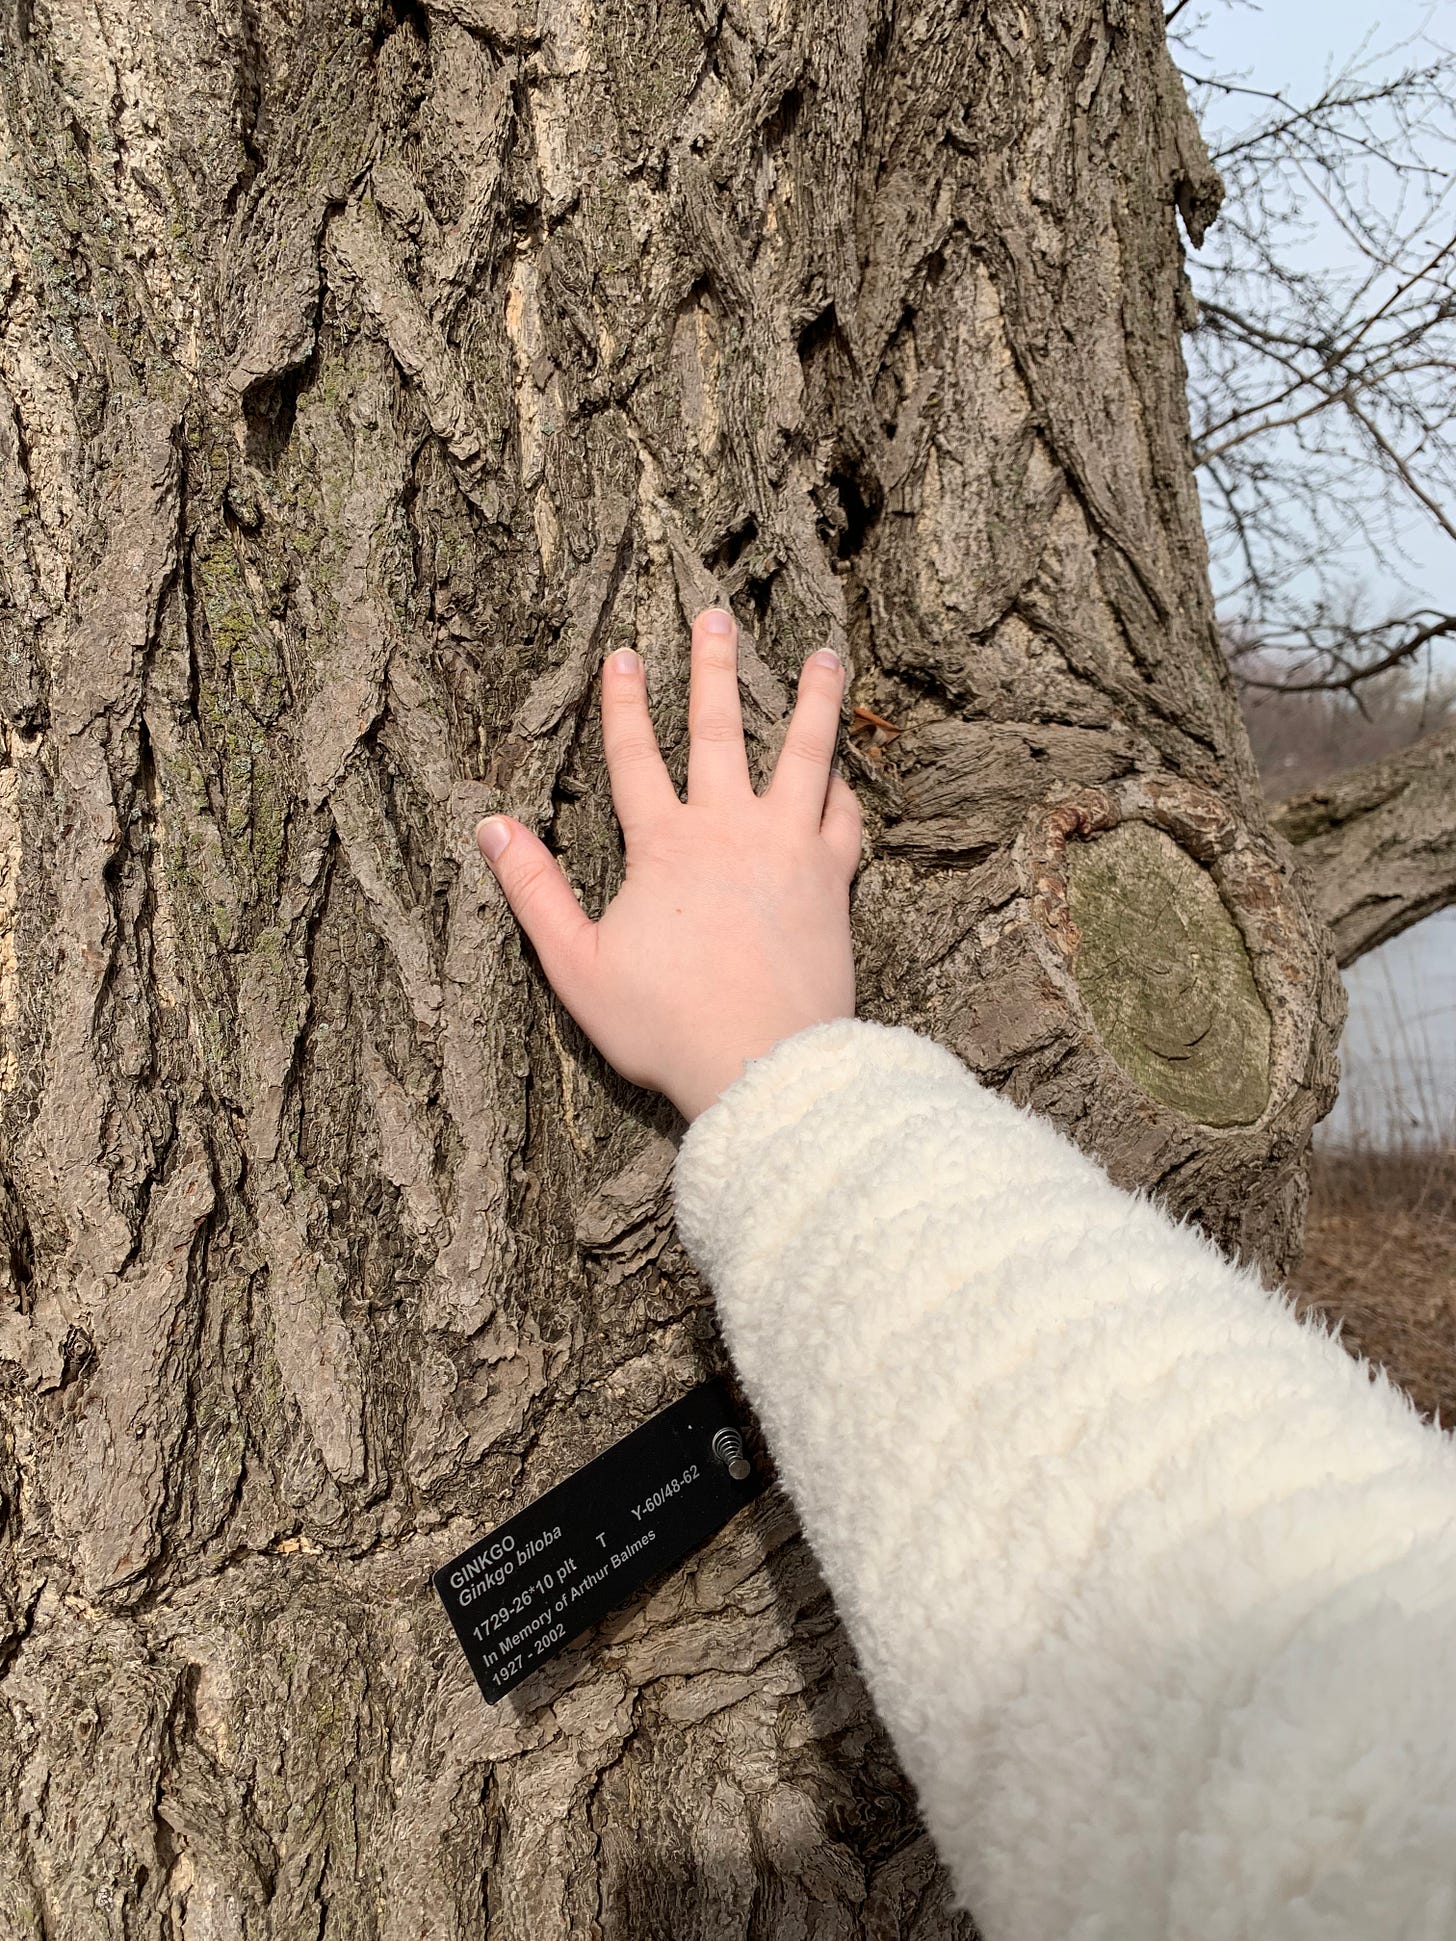 A hand touching a hard, textured brown tree bark.